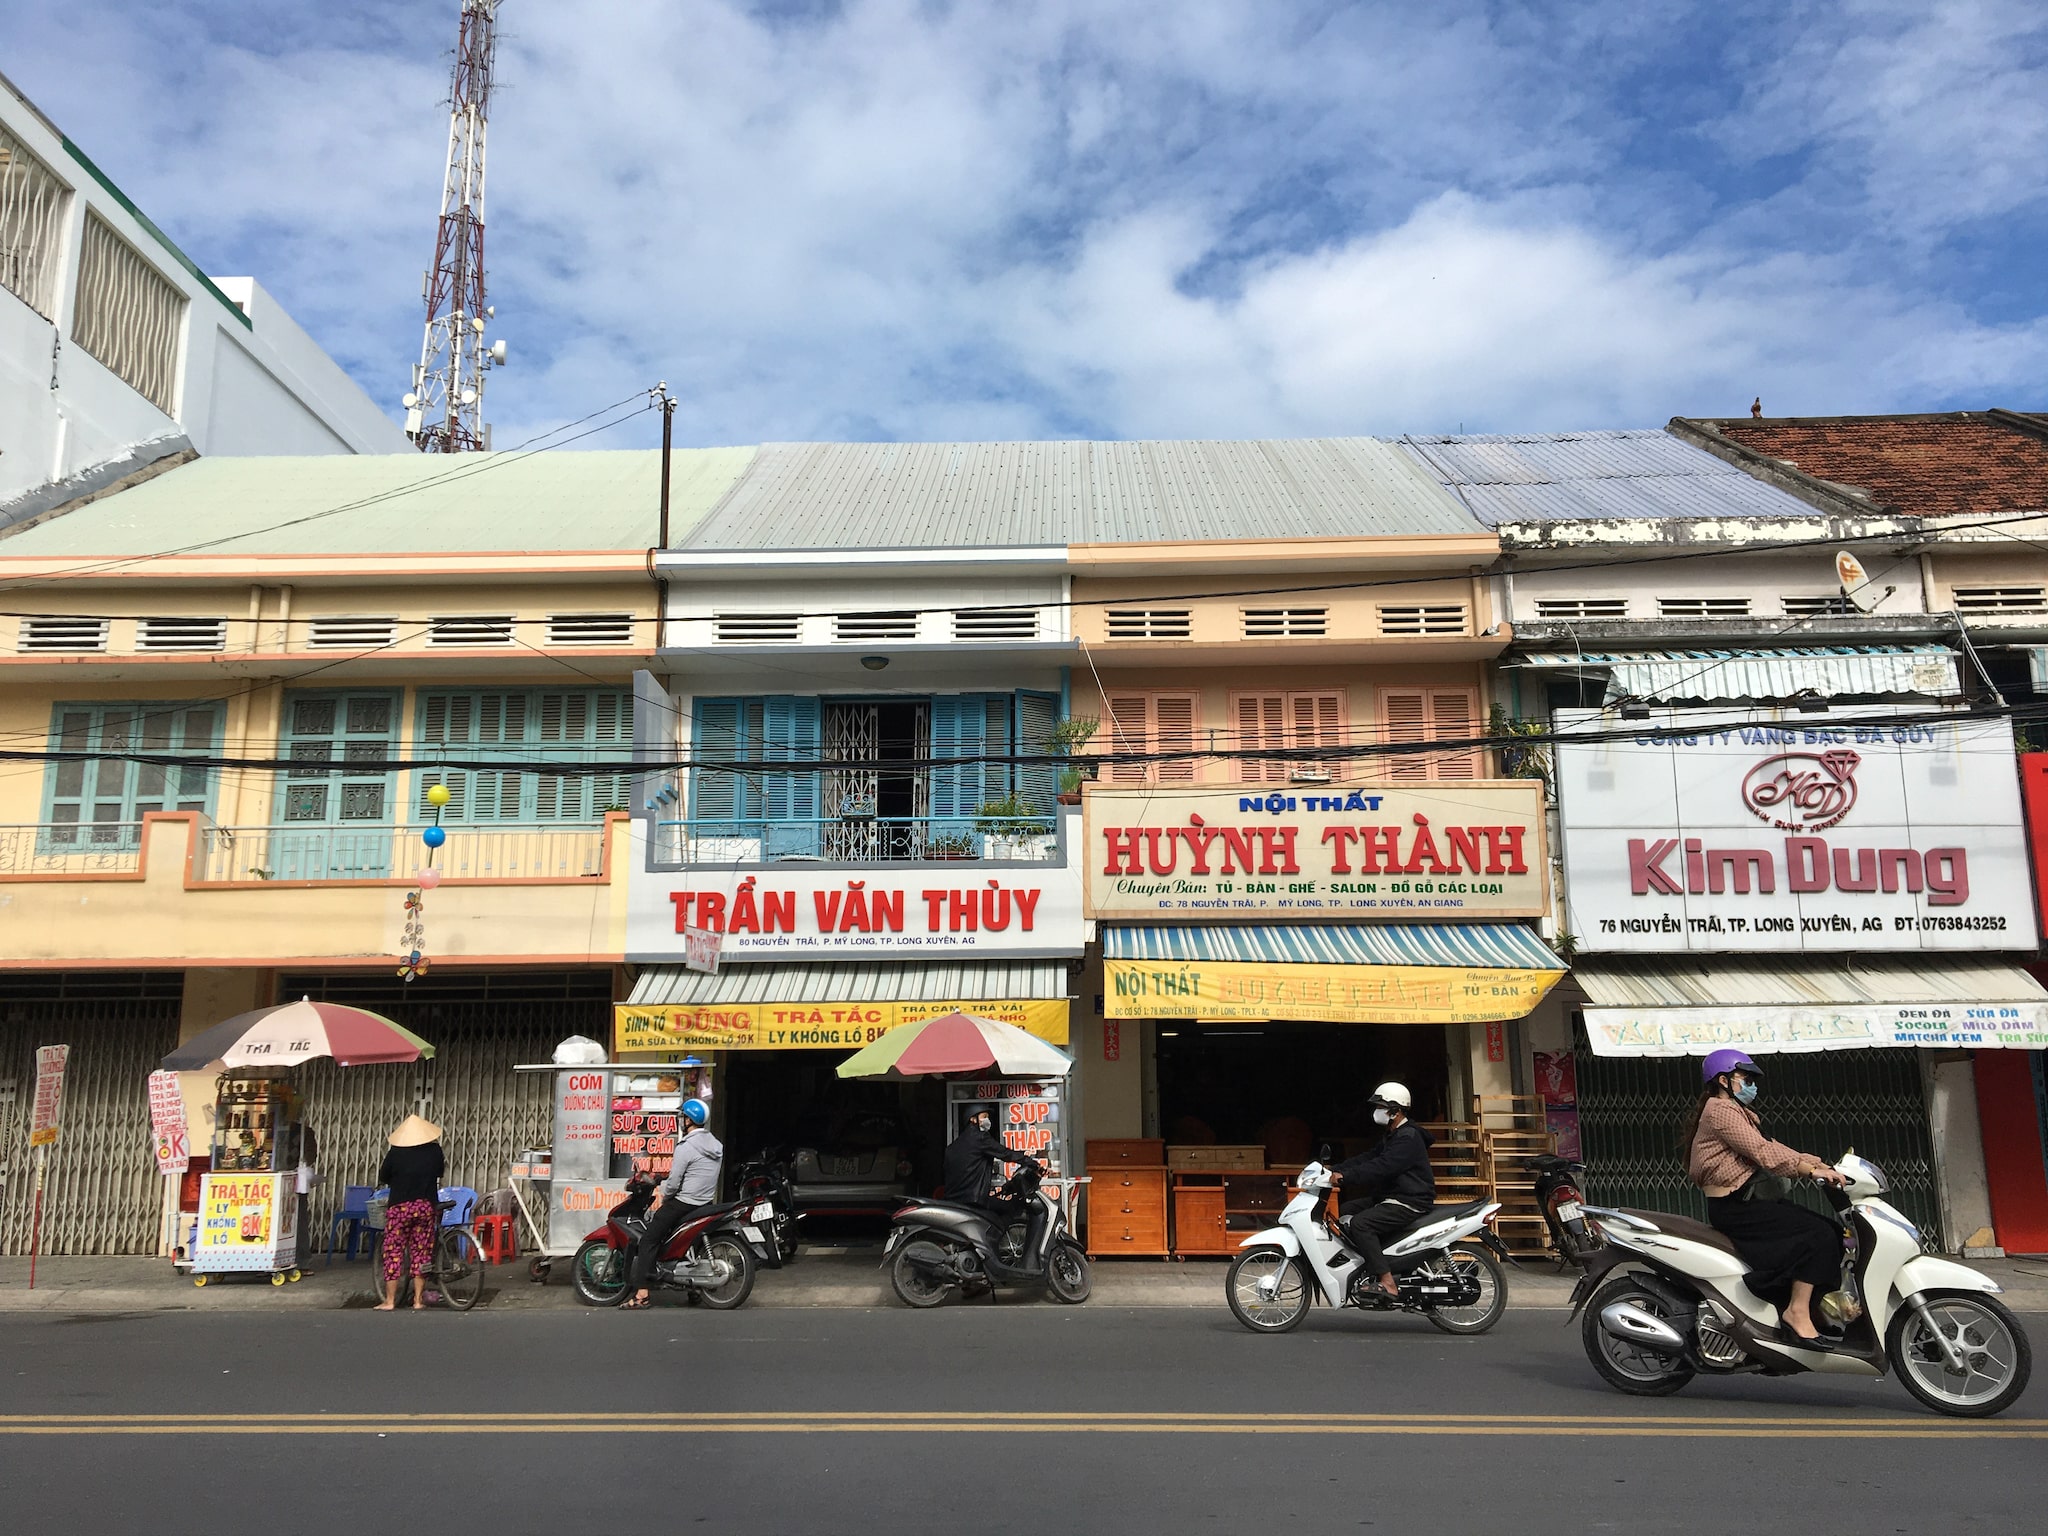 A foodie’s guide to Long Xuyen in southern Vietnam